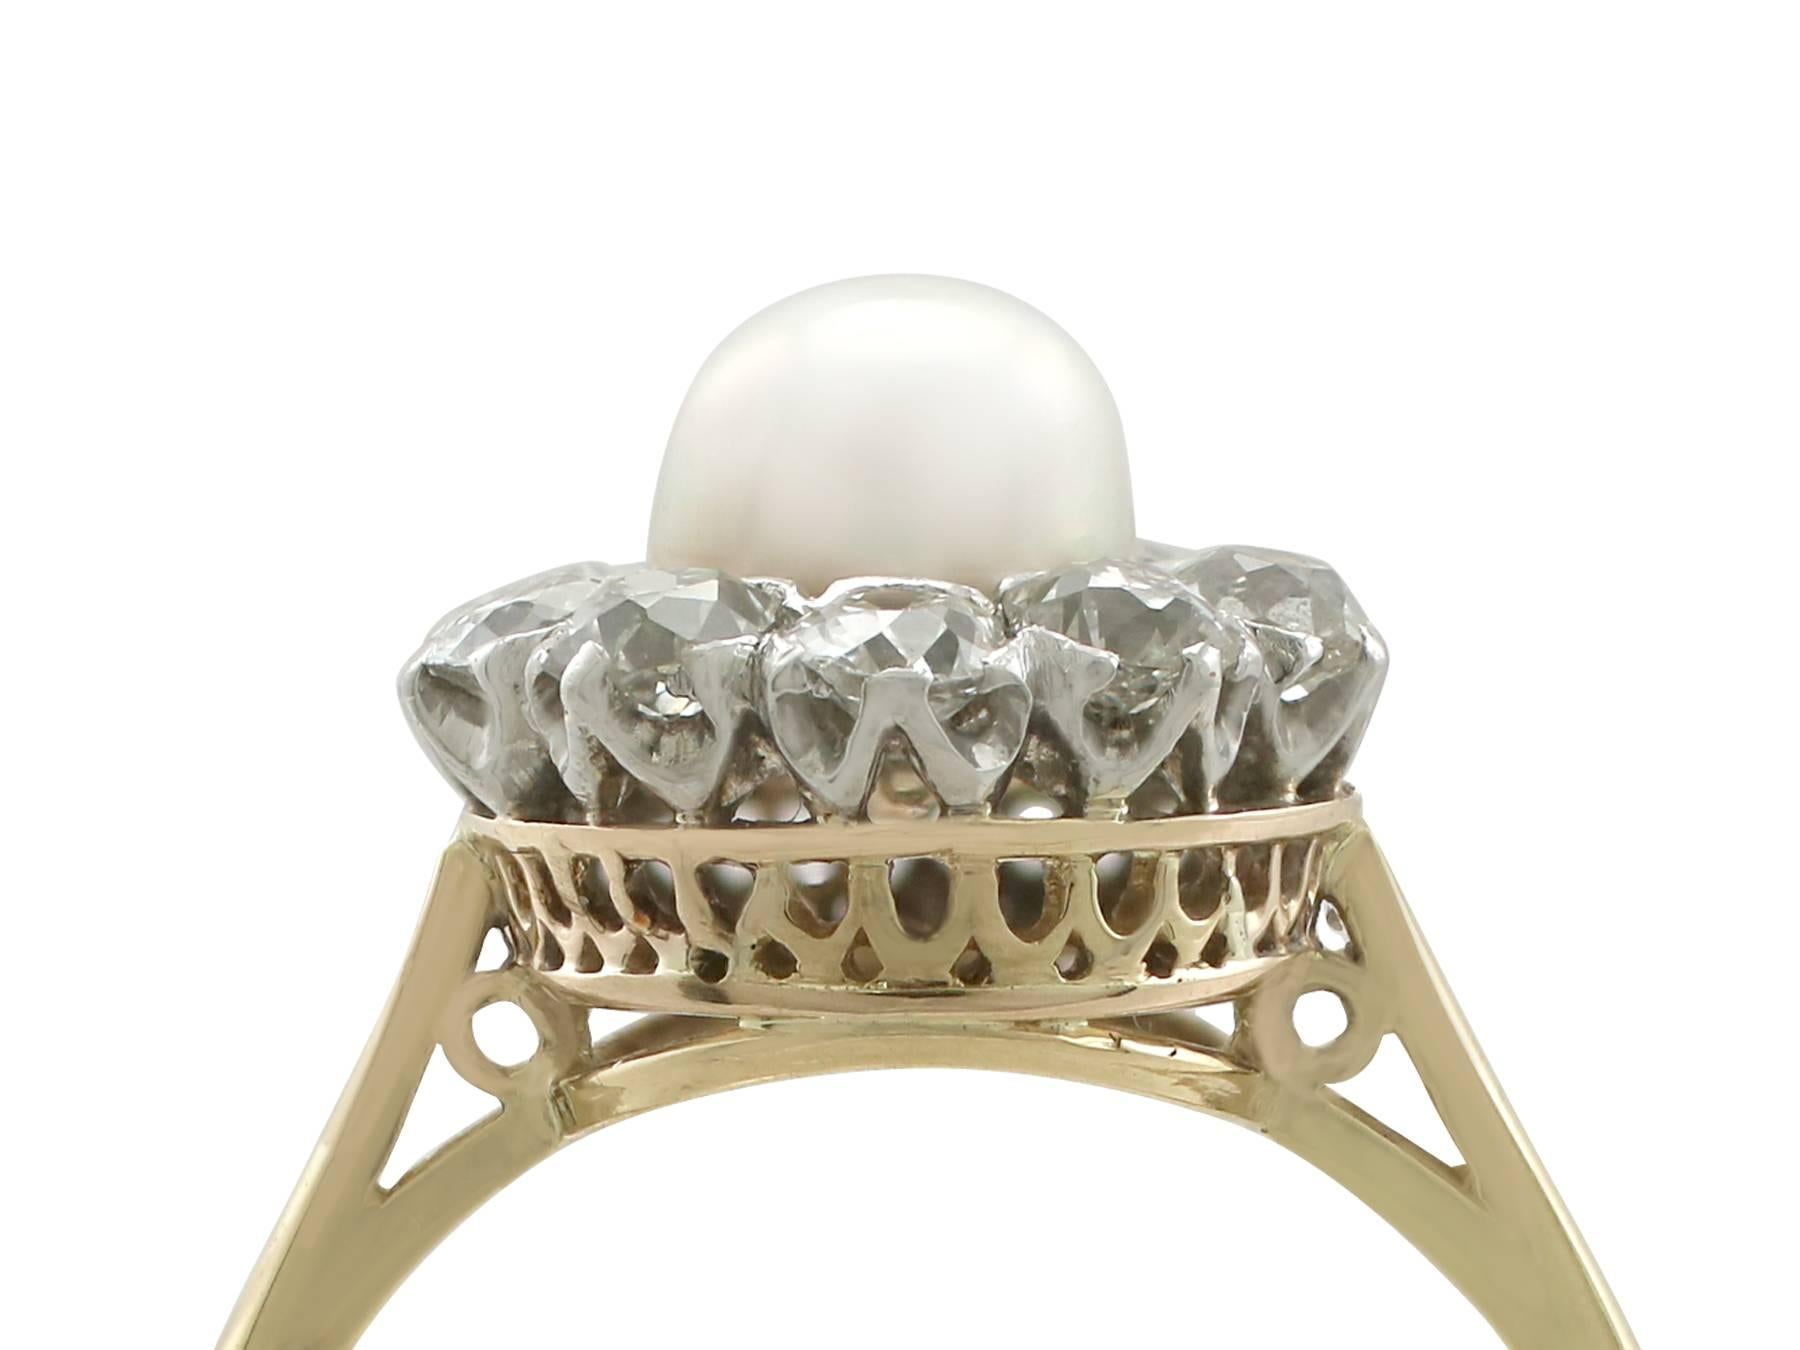 An impressive cultured pearl and 1.10 carat diamond, 18 carat yellow gold and 18 carat white gold set cluster ring; part of our diverse antique jewellery collections.

This fine and impressive pearl and diamond cluster ring has been crafted in 18 ct